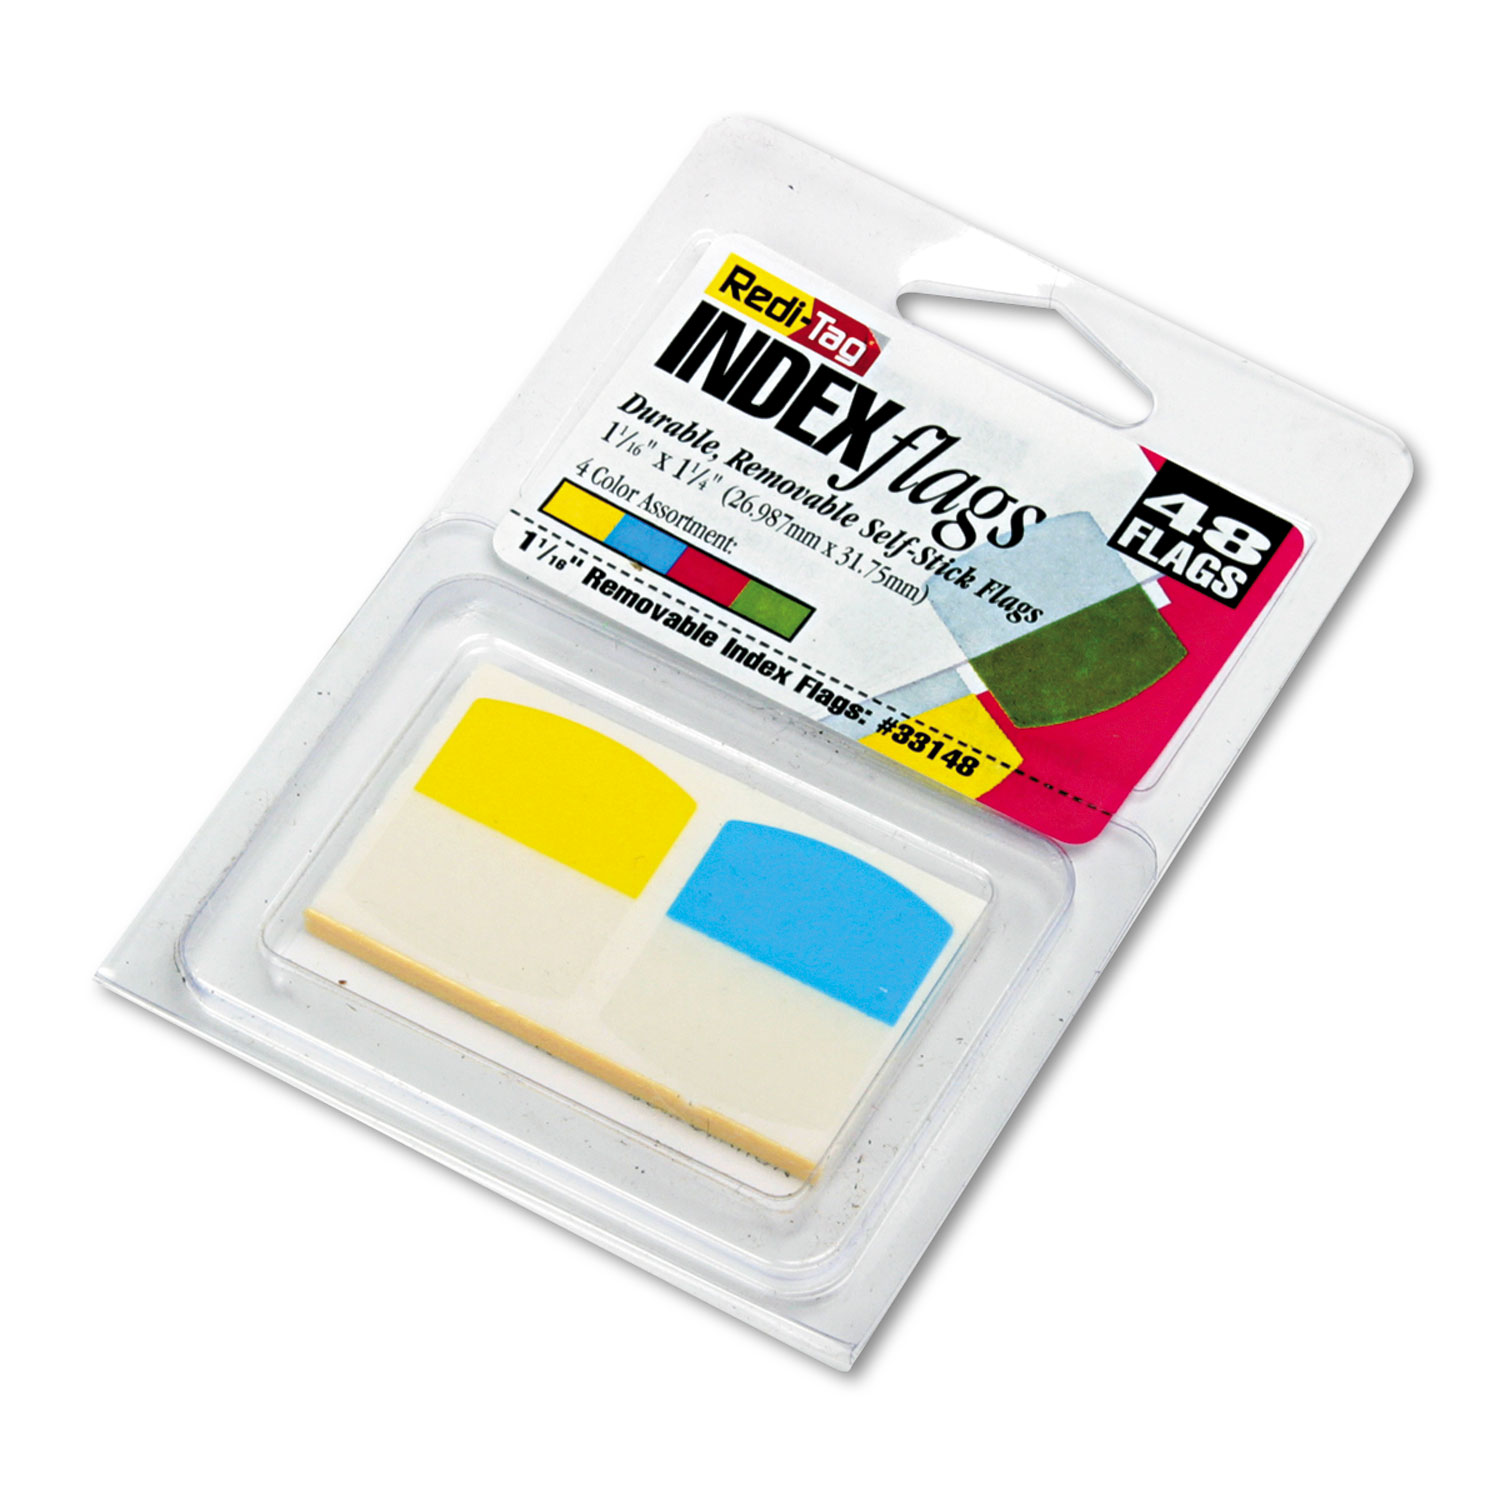 Write-On Self-Stick Index Tabs, 1 1/16 Inch, 4 Colors, 48/Pack